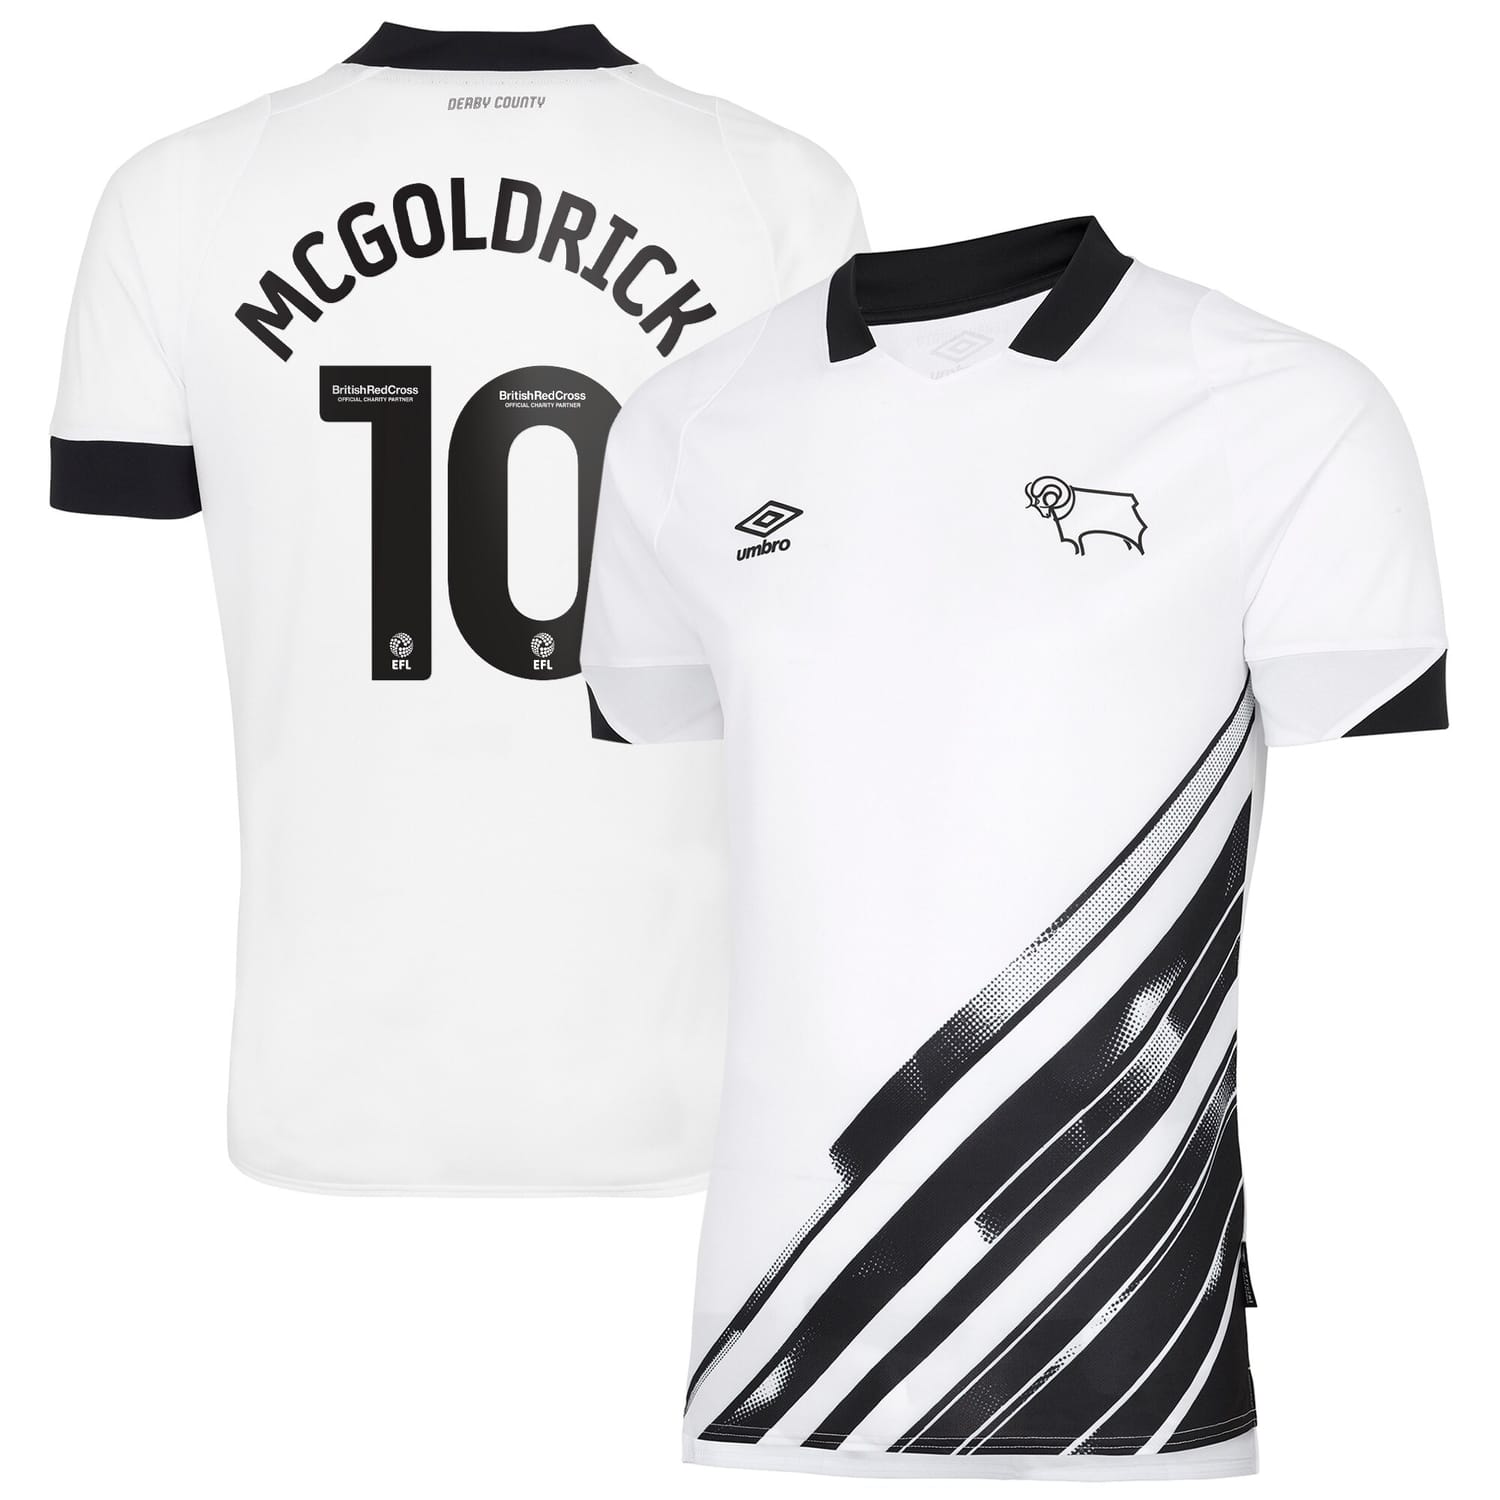 EFL League One Derby County Home Jersey Shirt 2022-23 player McGoldrick 10 printing for Men